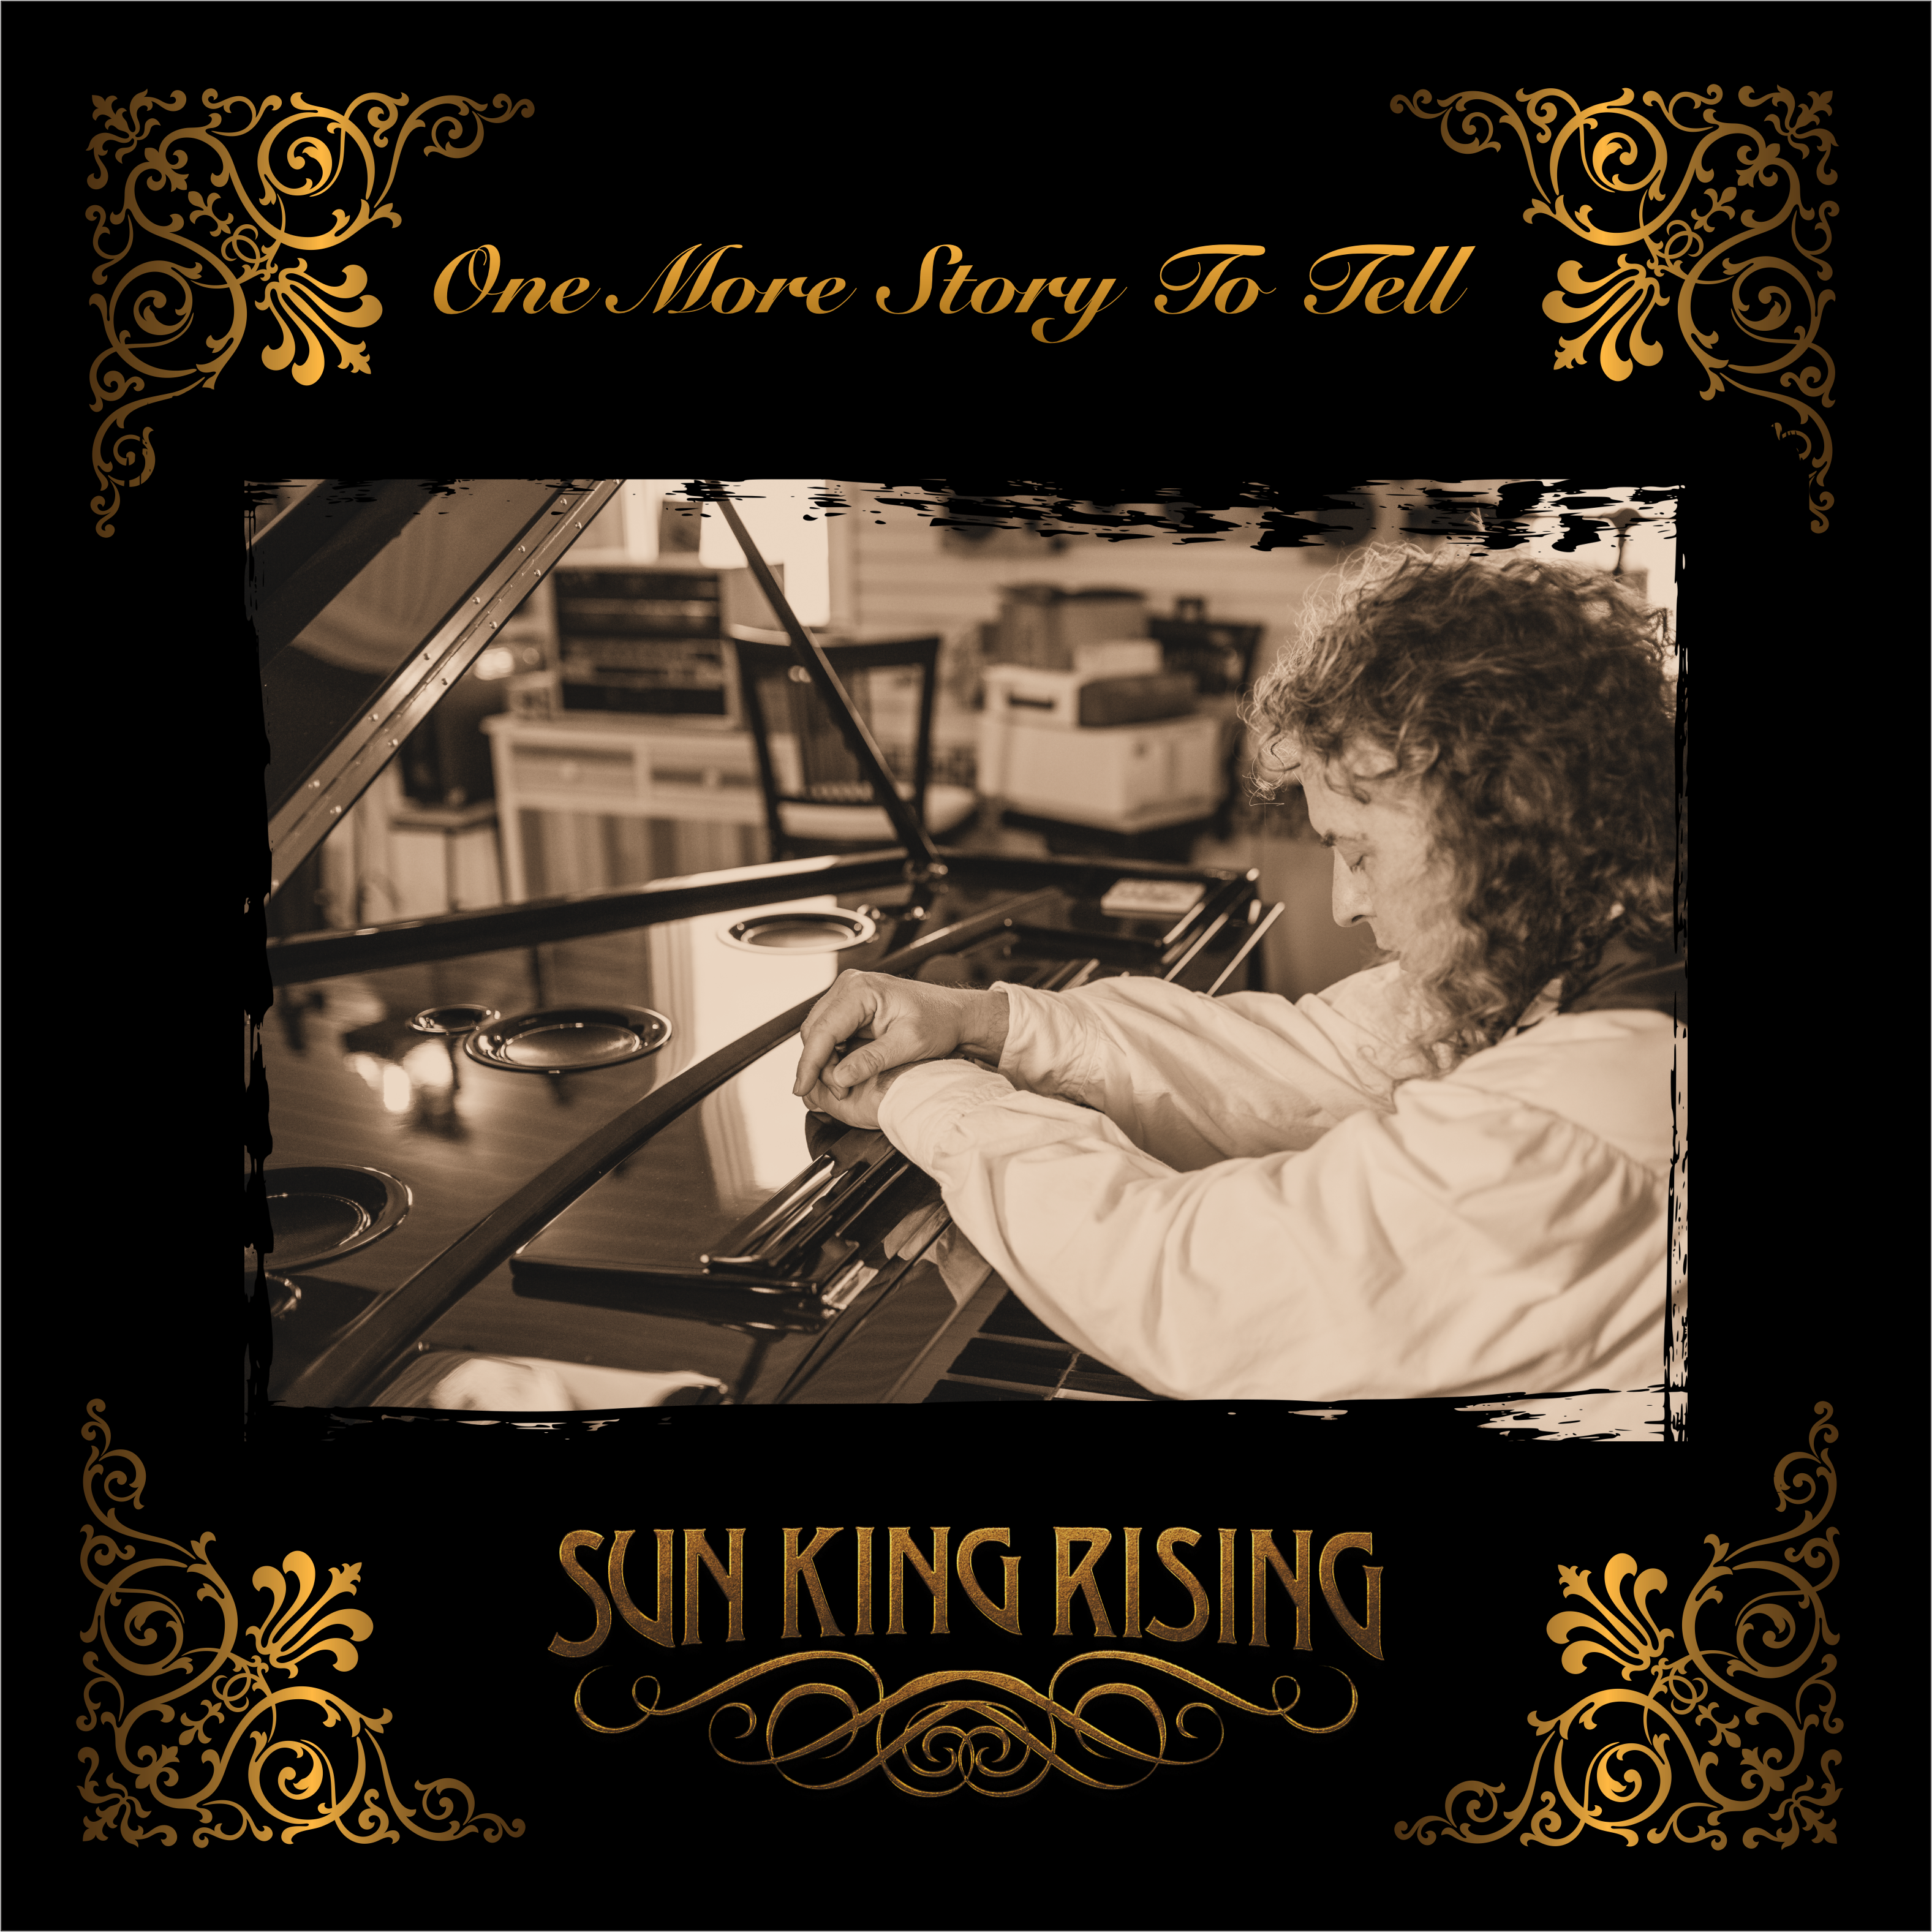 Sun King Rising Presents ‘One More Story to Tell’: A Musical Chronicle of Intrigue and Artistry